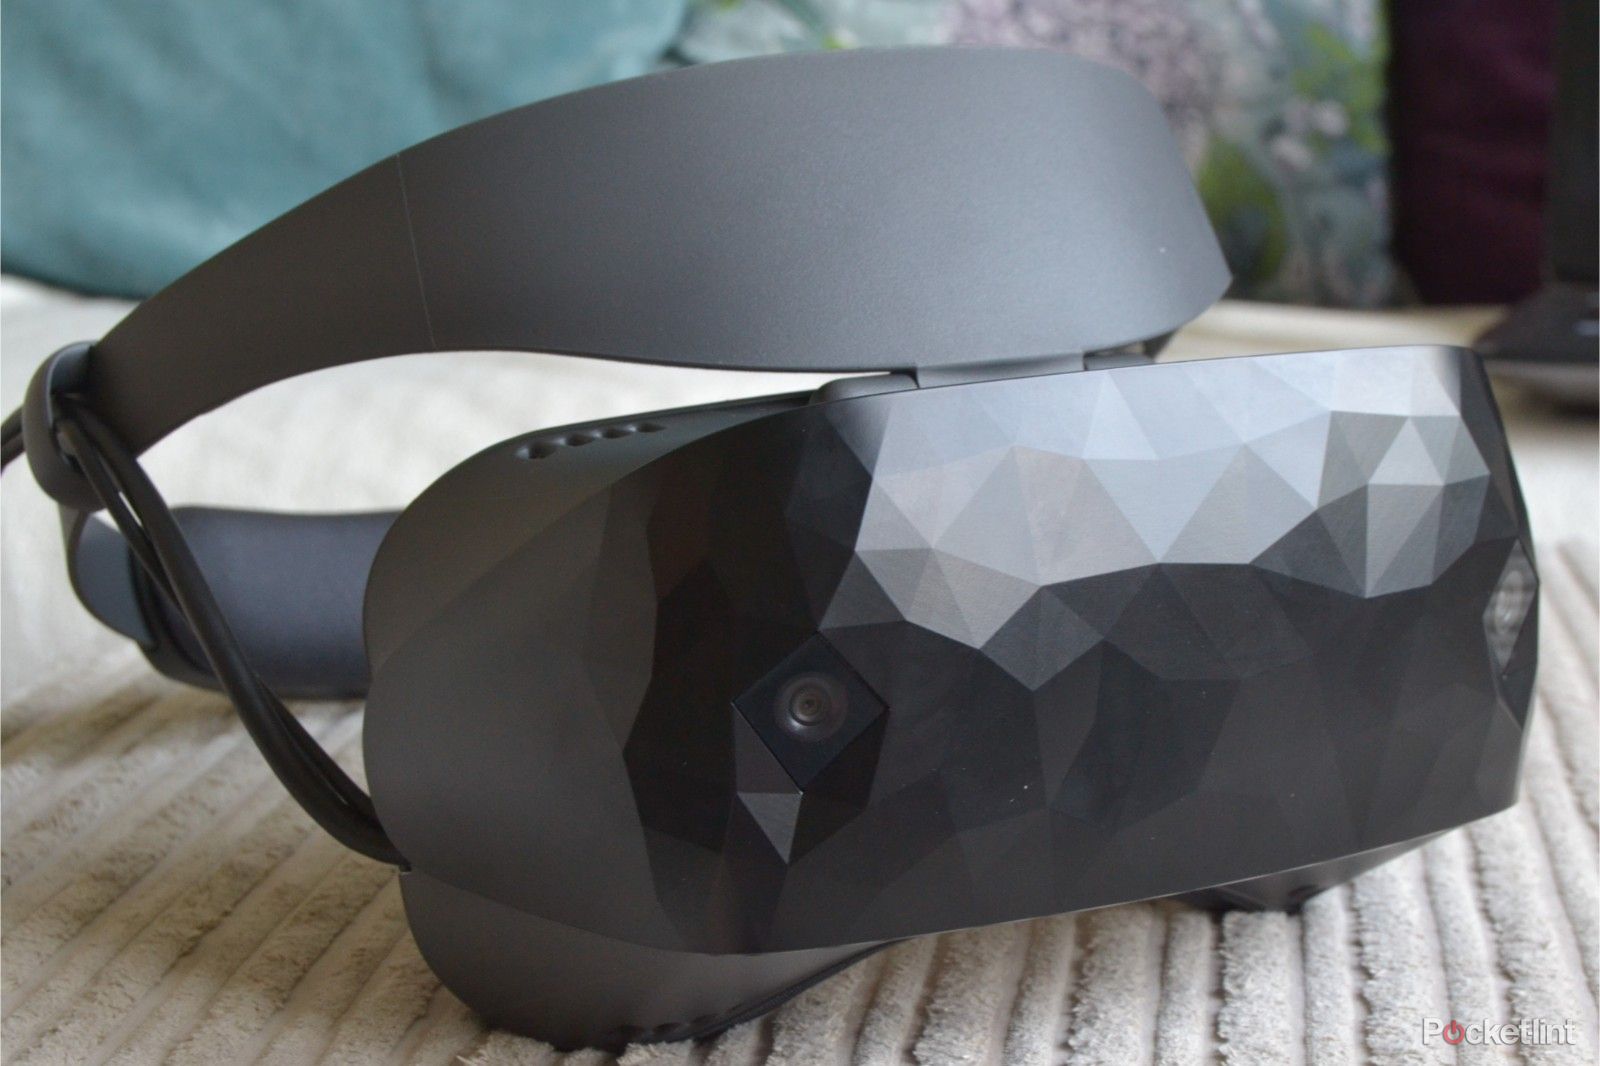 Asus Windows Mixed Reality Headset review lead image 1